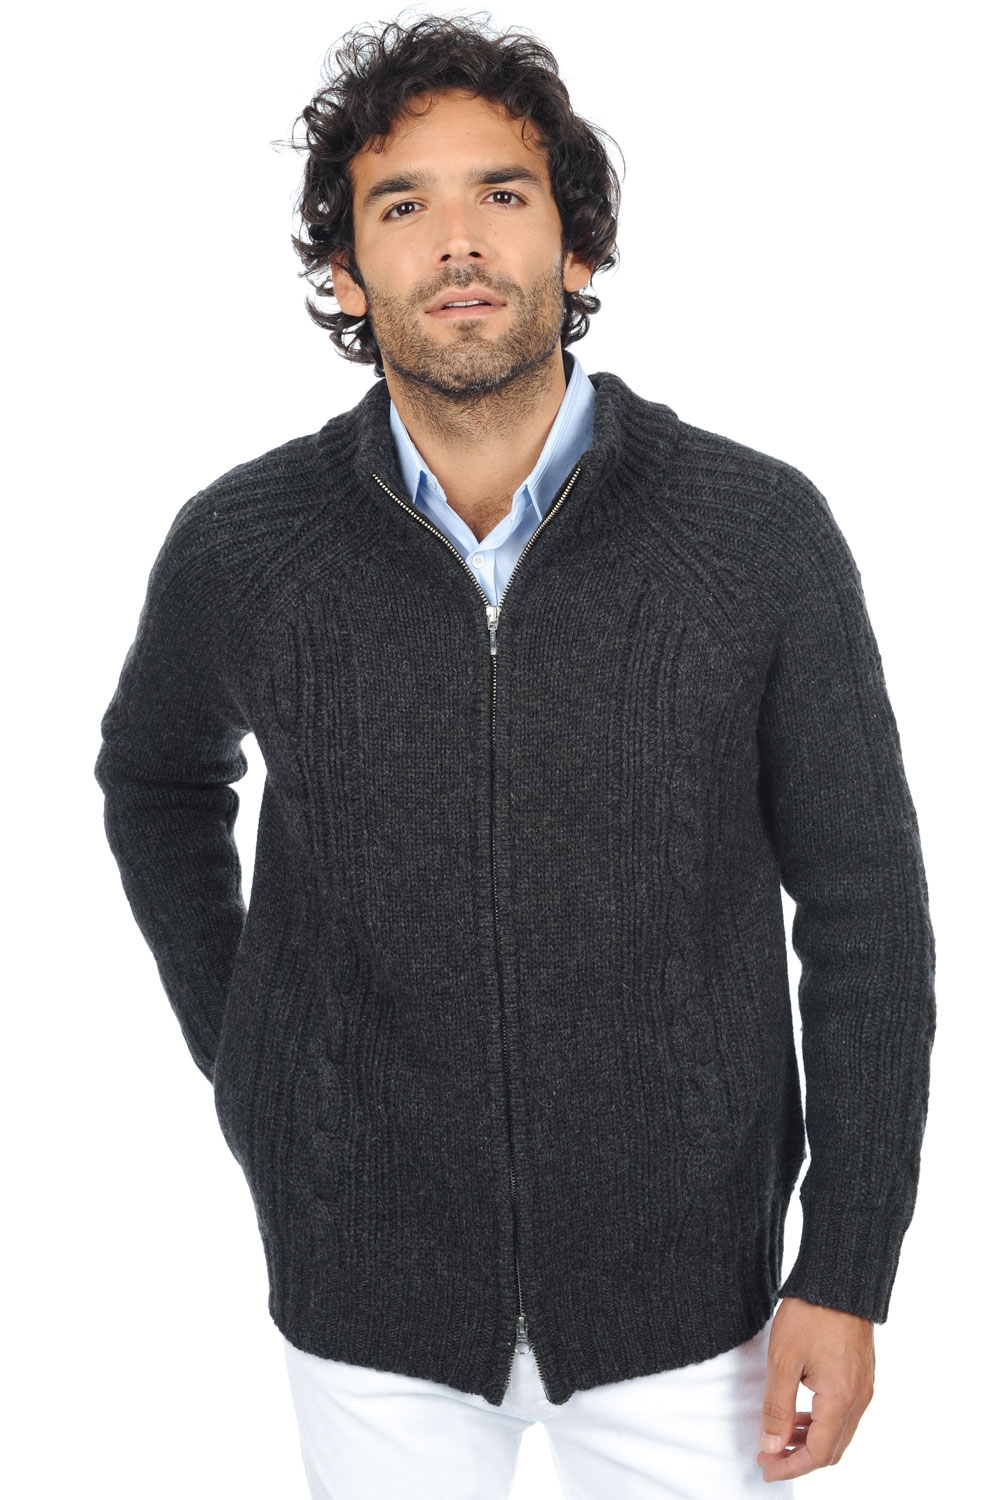 Chameau pull homme zip capuche thais anthracite xs